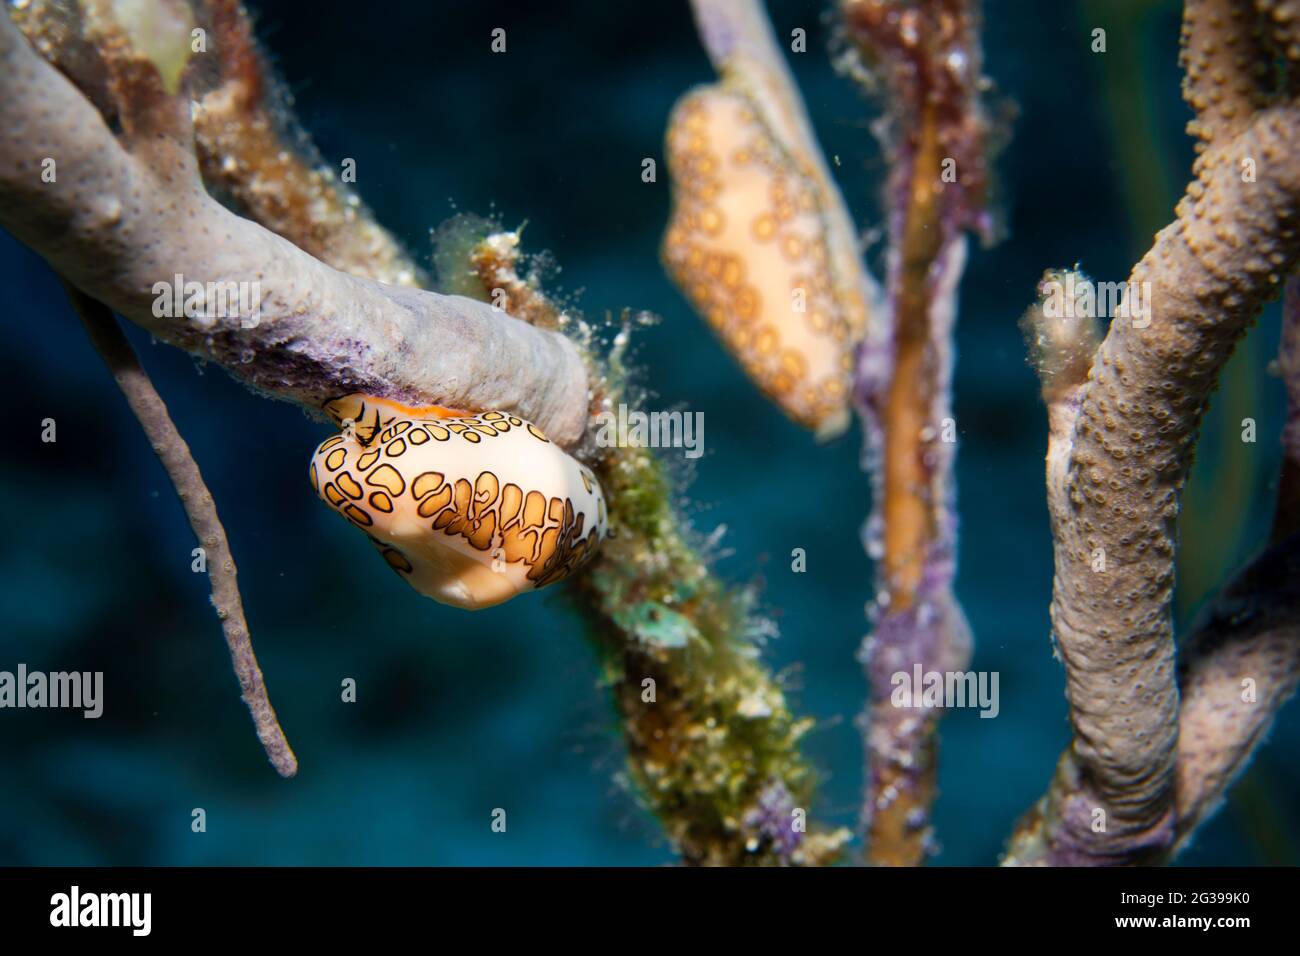 Flamingo tongue on a coral, underwater photography in Cozumel Mexico Stock Photo